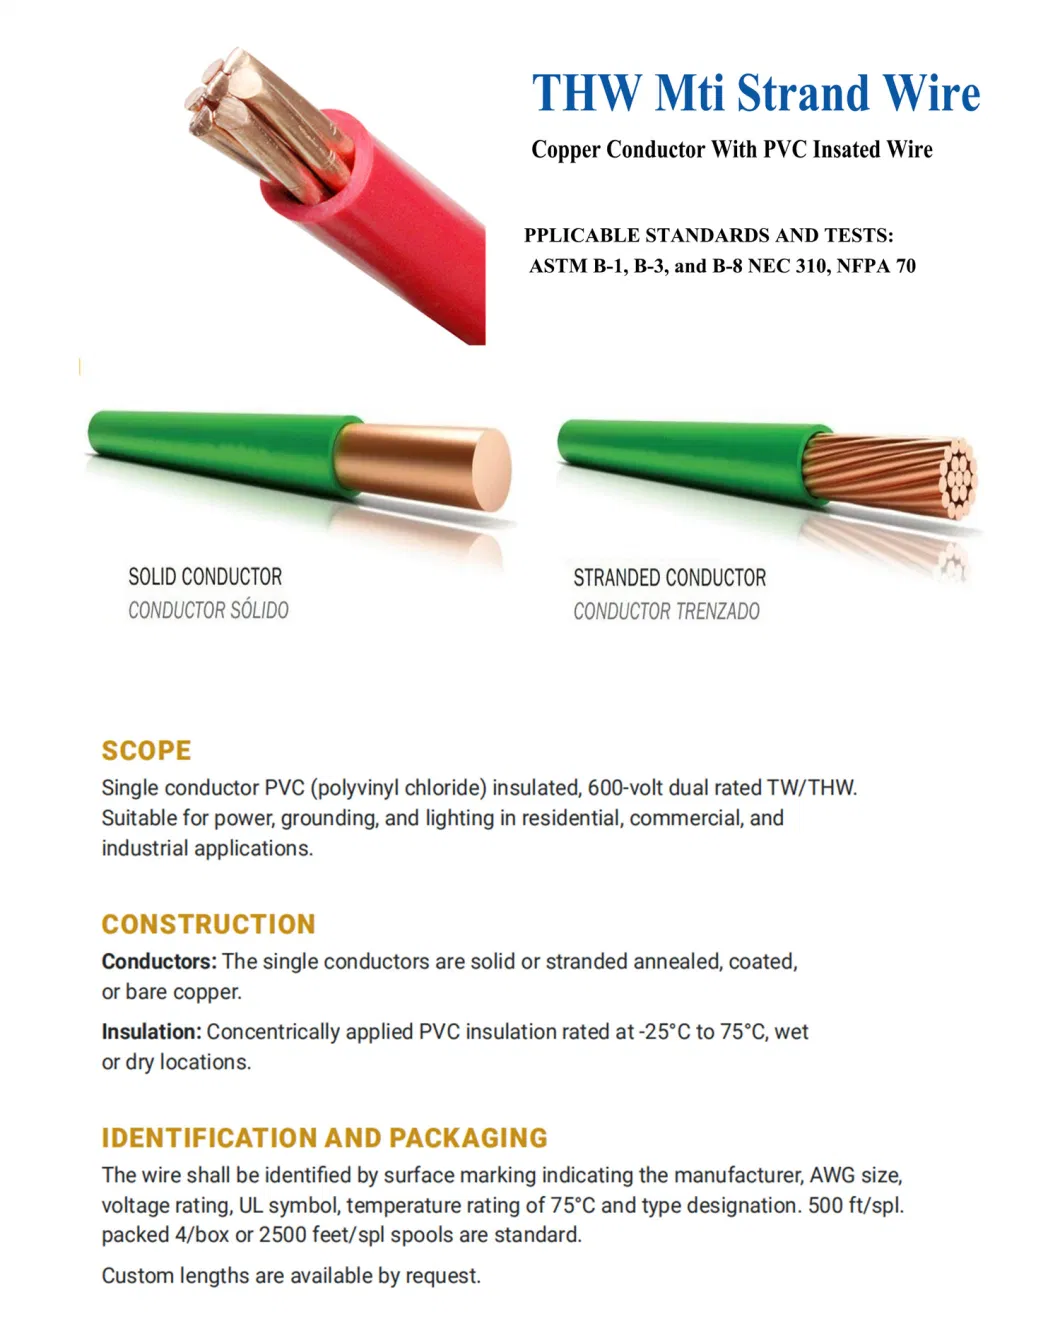 1.5mm/2.5mm2 Thw Electrical Cable Wire/Copper/PVC Insulated Electrical Wires